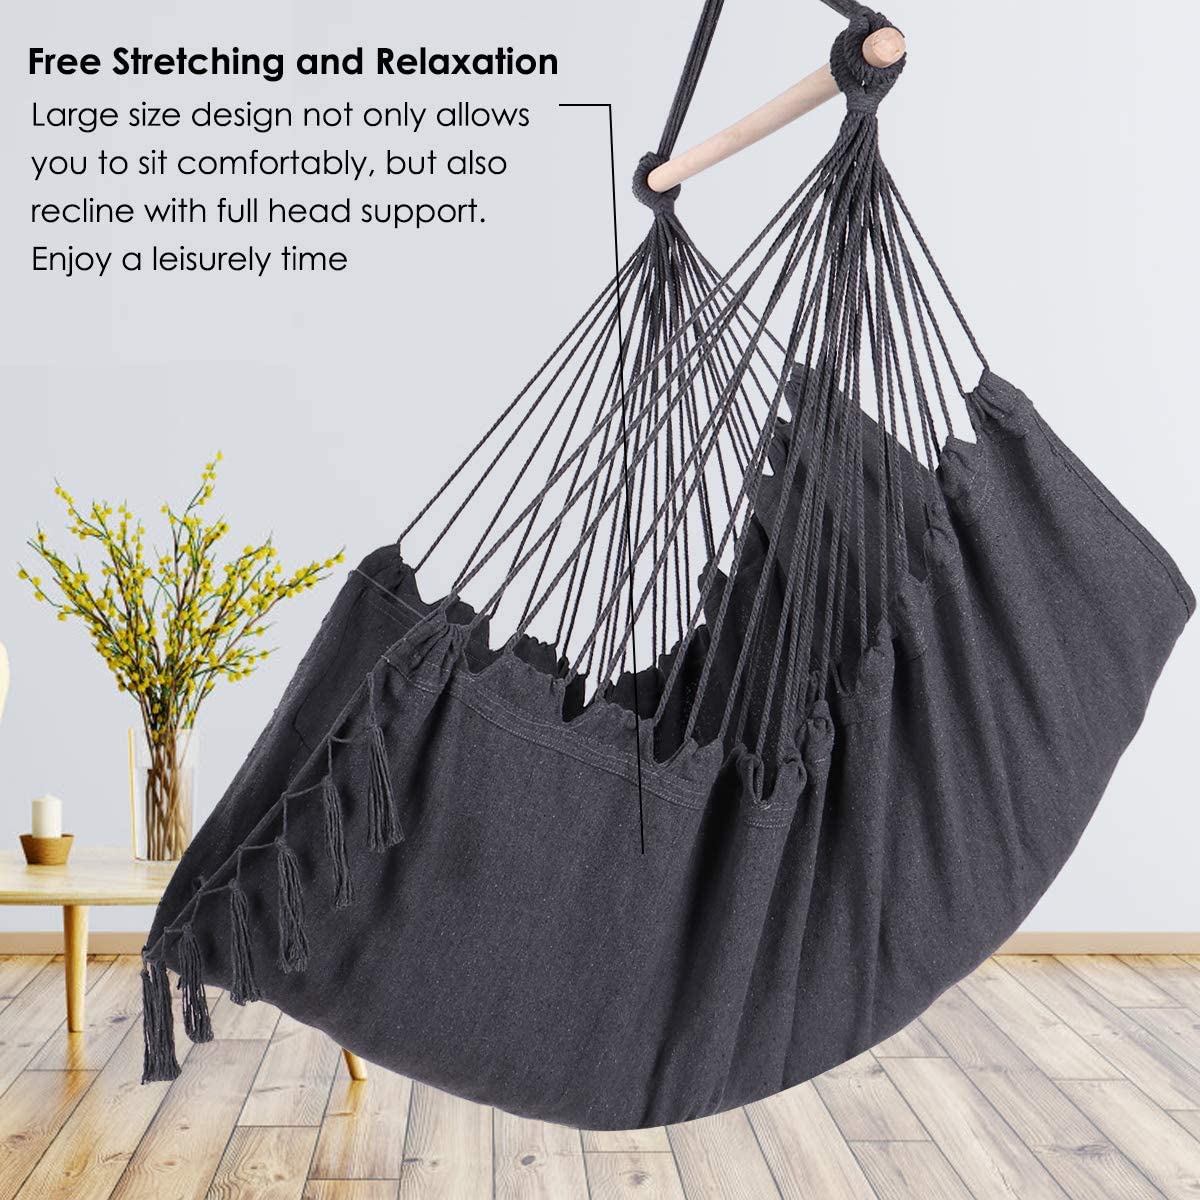 Max-330Lbs150KG-Hammock-Chair-Hanging-Rope-Swing-with-2-Cushions-Included-Large-Tassel-Hanging-Chair-1726402-4